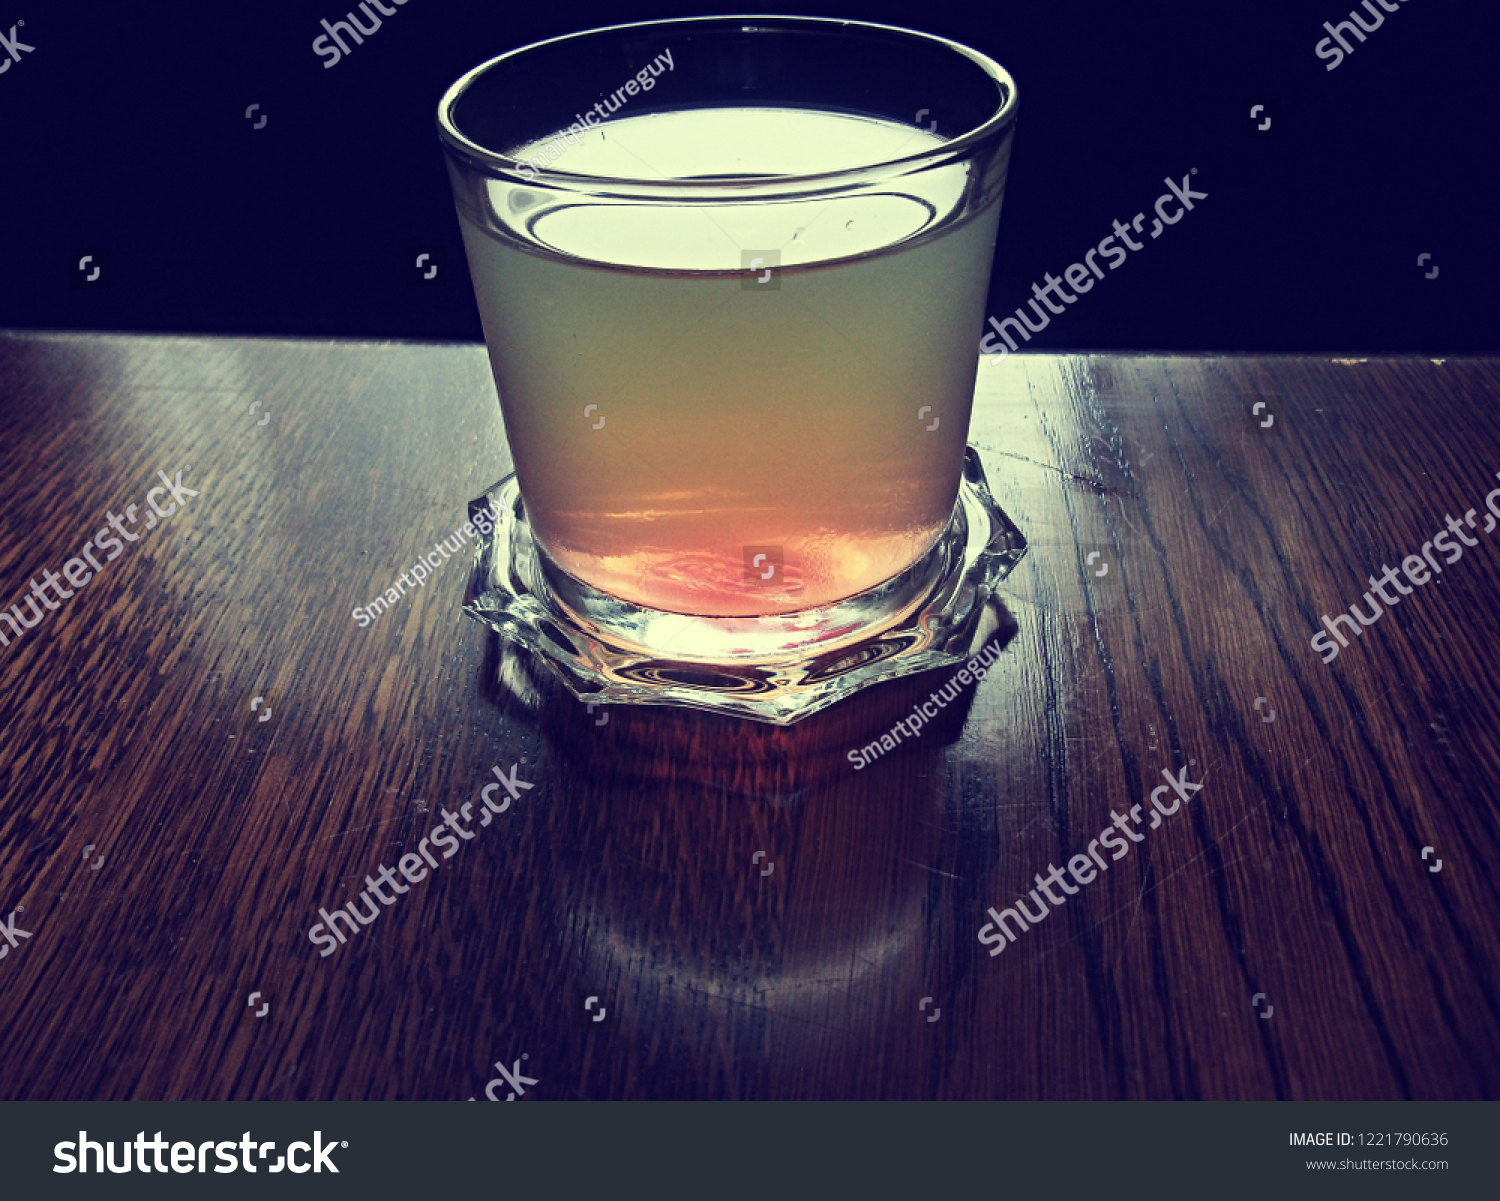 Download Ice Cold Yellow Soda Drink Glass Stock Photo Edit Now 1221790636 PSD Mockup Templates